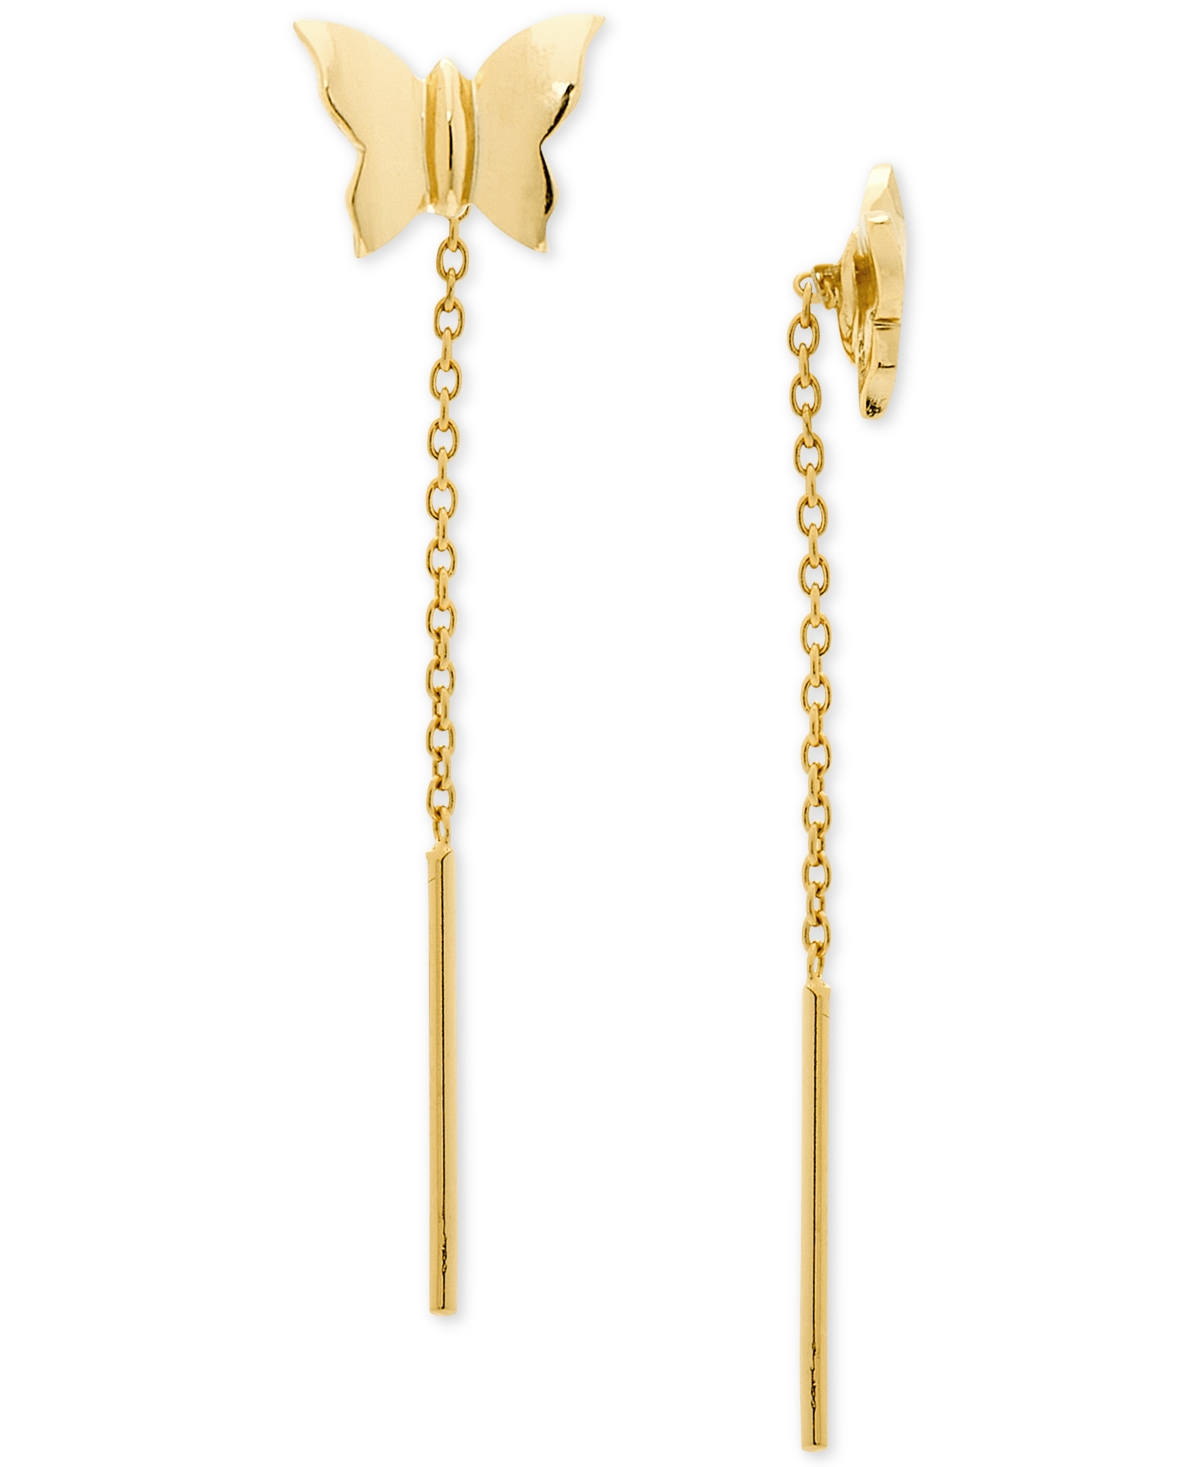 GIANI BERNINI BUTTERFLY THREADER DROP EARRINGS IN 18K GOLD-PLATED STERLING SILVER, CREATED FOR MACY'S (ALSO IN STE